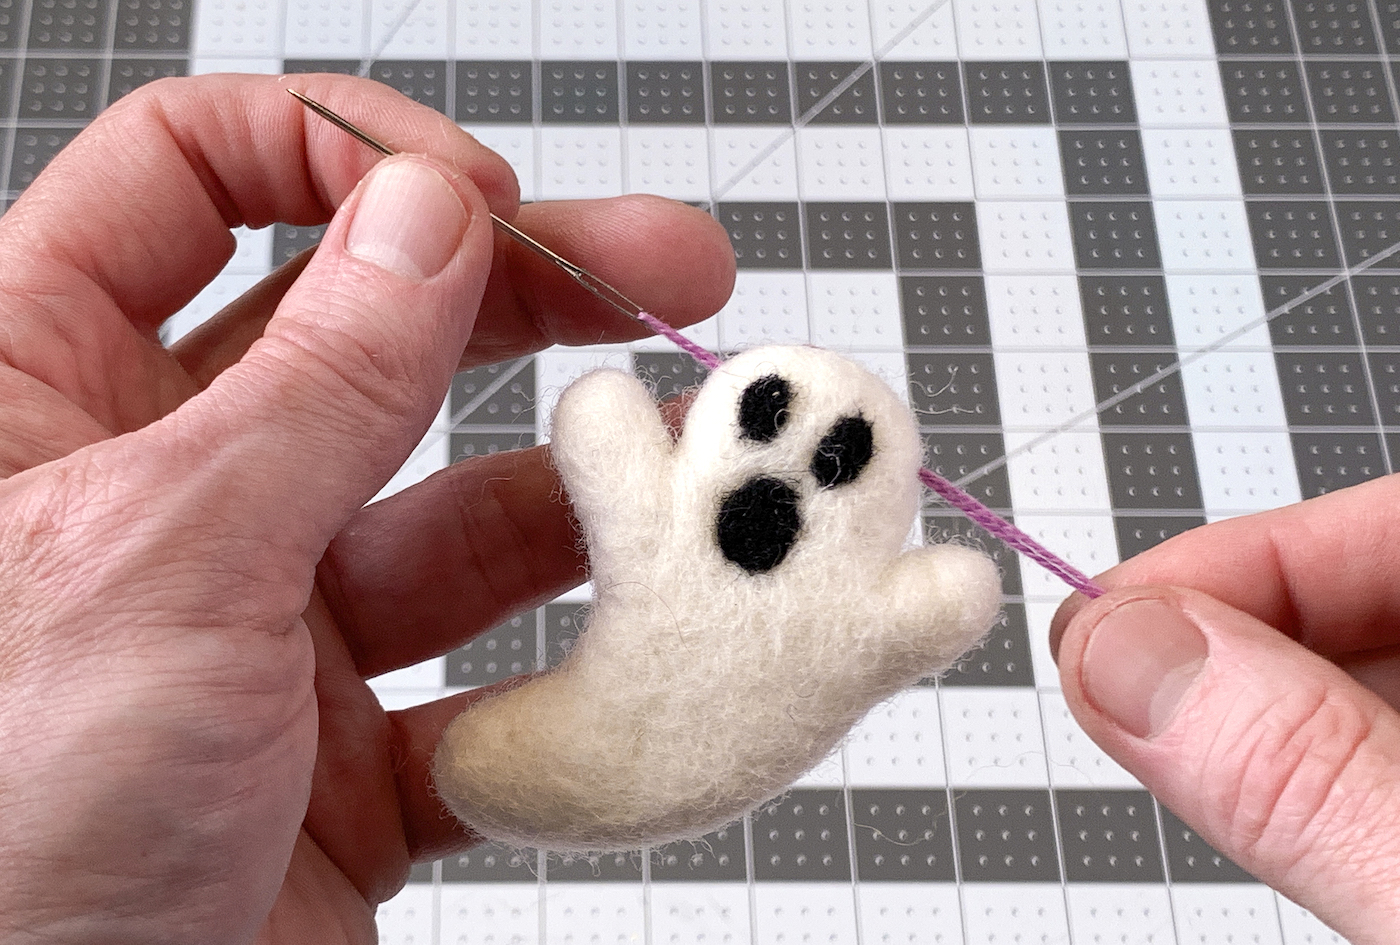 Stringing a felt ghost with purple embroidery floss